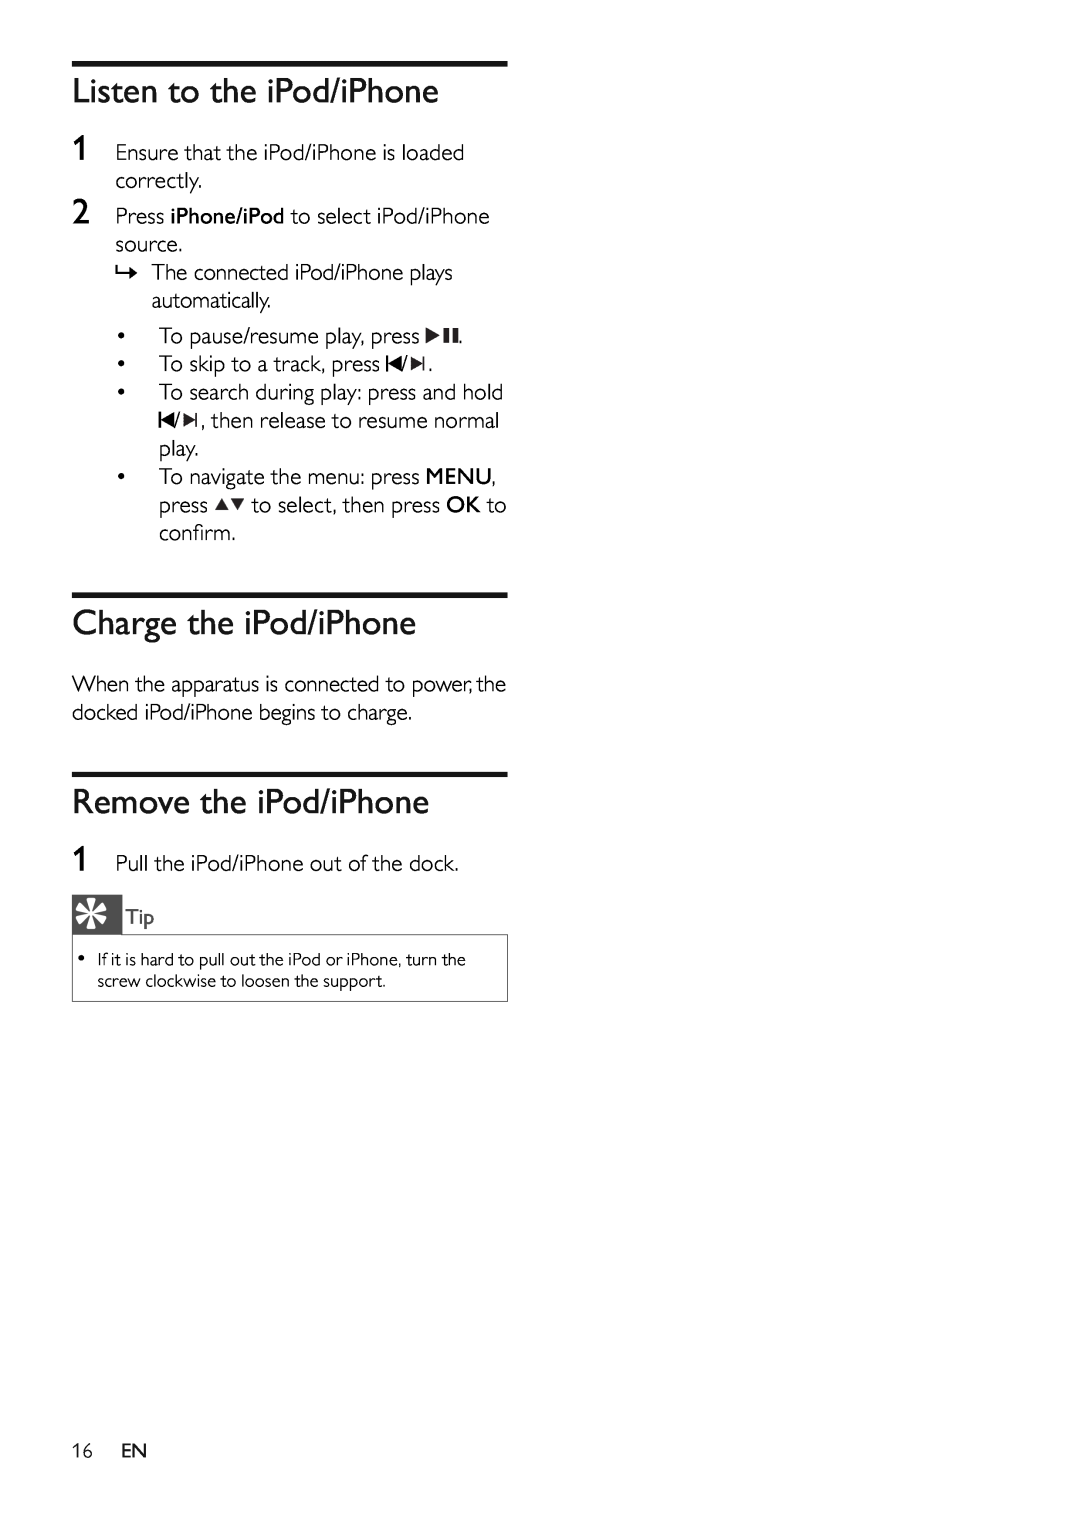 Philips MCM280D/12 user manual Listen to the iPod/iPhone, Charge the iPod/iPhone, Remove the iPod/iPhone 